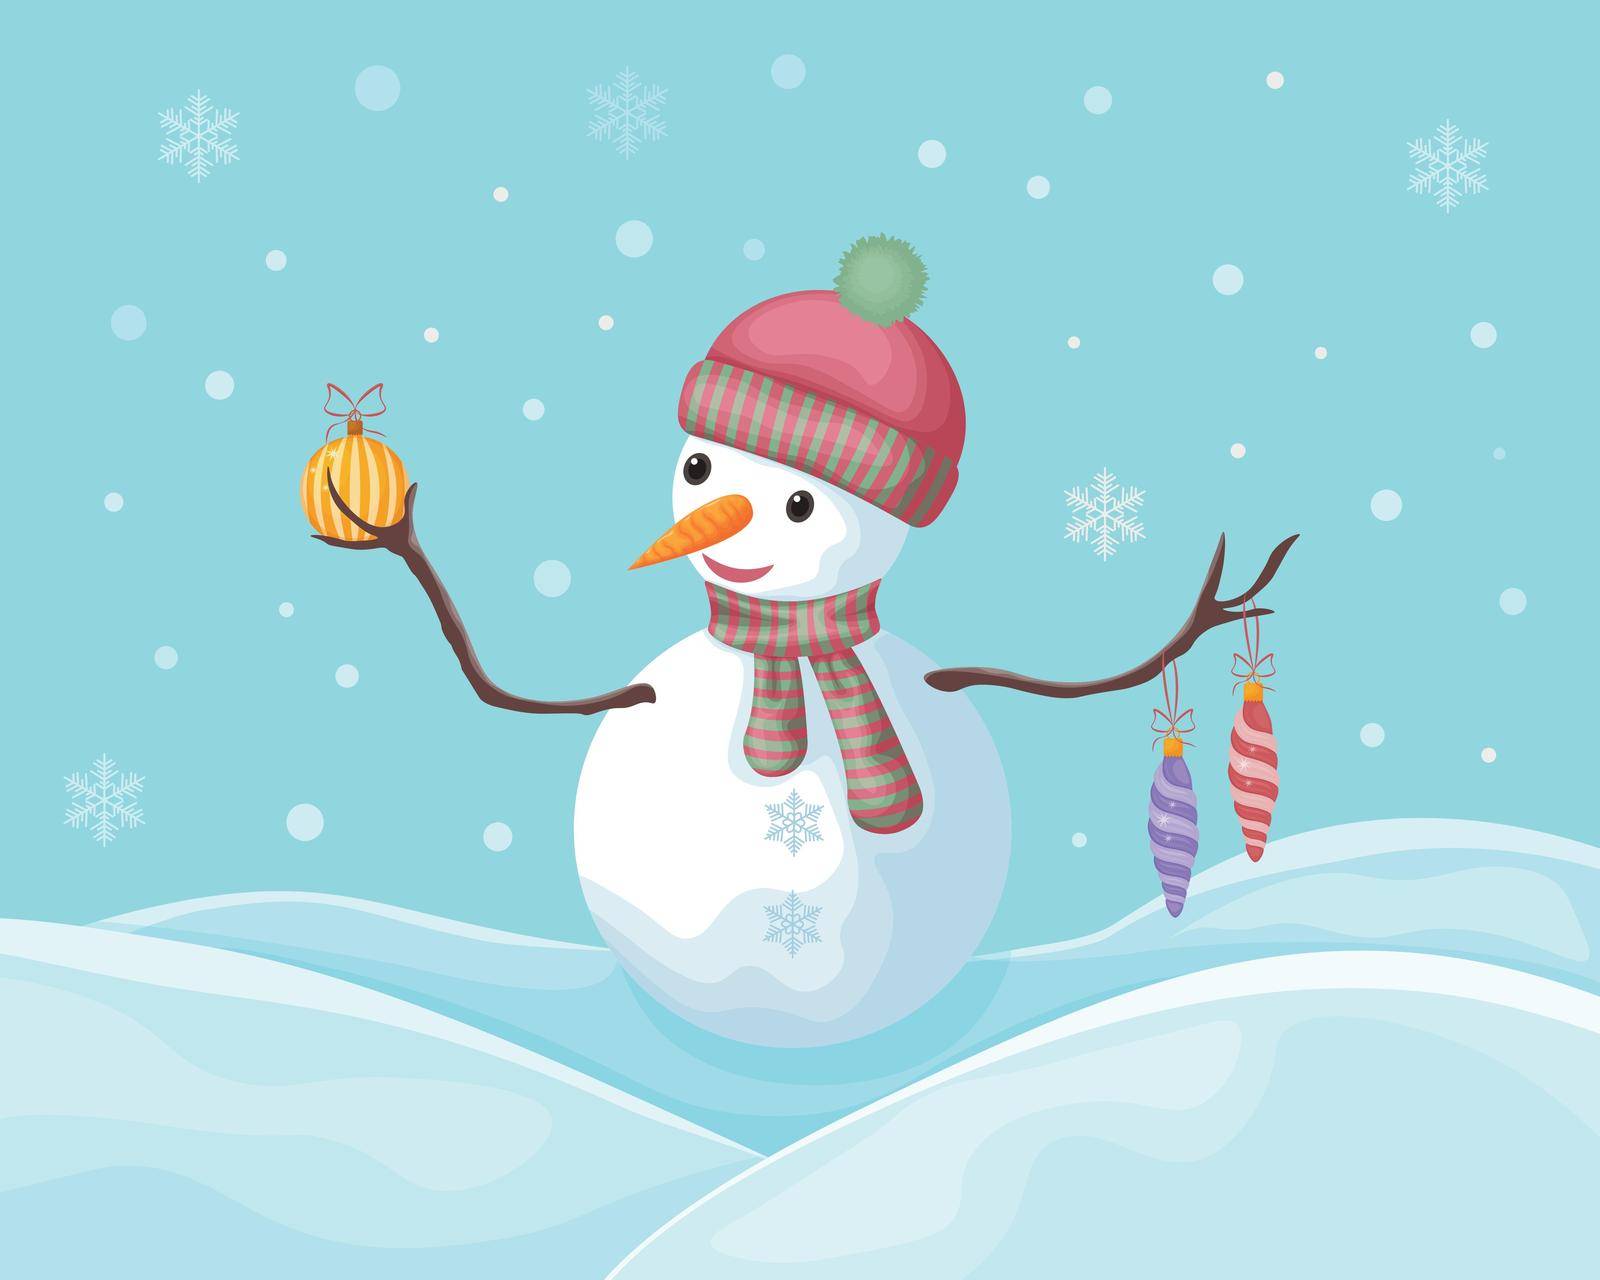 The snowman. Winter illustration depicting a cute snowman with Christmas tree toys. A cheerful snowman in a hat and scarf. Christmas illustration vector.